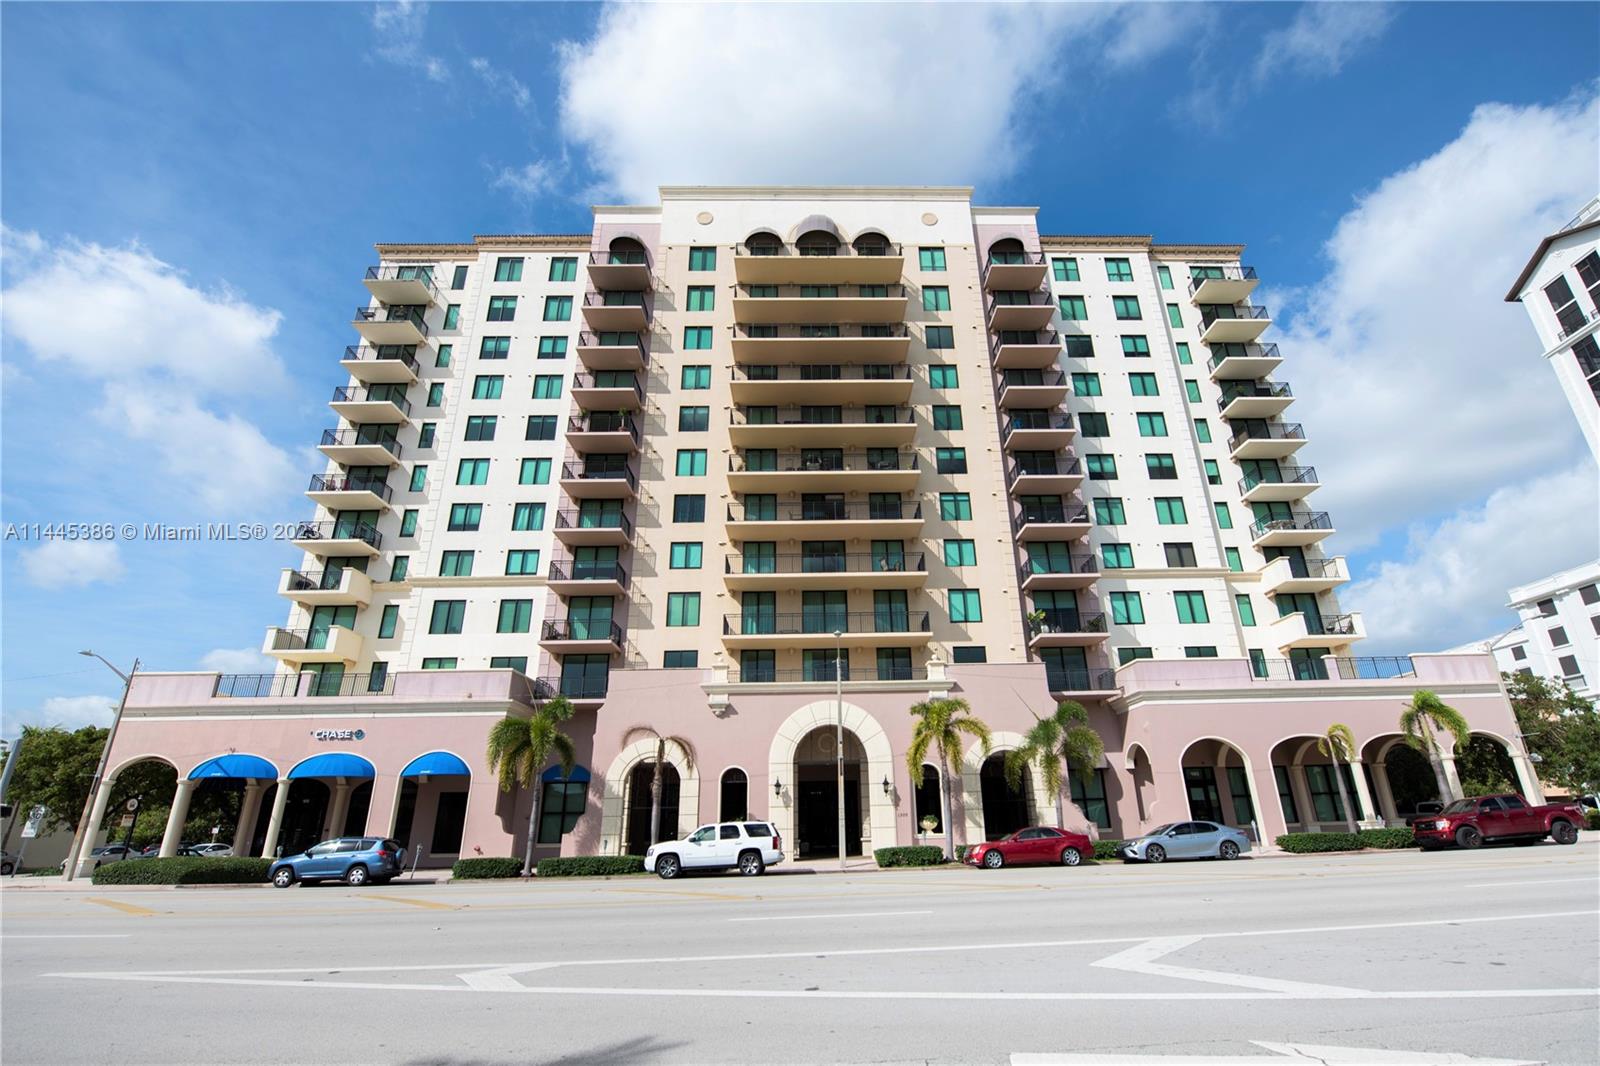 Exquisite condo in the heart of Coral Gables just blocks from Miracle Mile and on Ponce de Leon Avenue. Minutes from Merrick Park, with easy access to all you need, and close to the airport.Stunning one-bedroom, one-and-a-half-bath unit with great views of South Gables. This unit has stainless steel appliances, elegant Italian cabinets,  exquisite granite countertops, walking closets, and a balcony. Situated in an excellent location, this condo is your gateway to luxurious living coupled with unparalleled convenience.